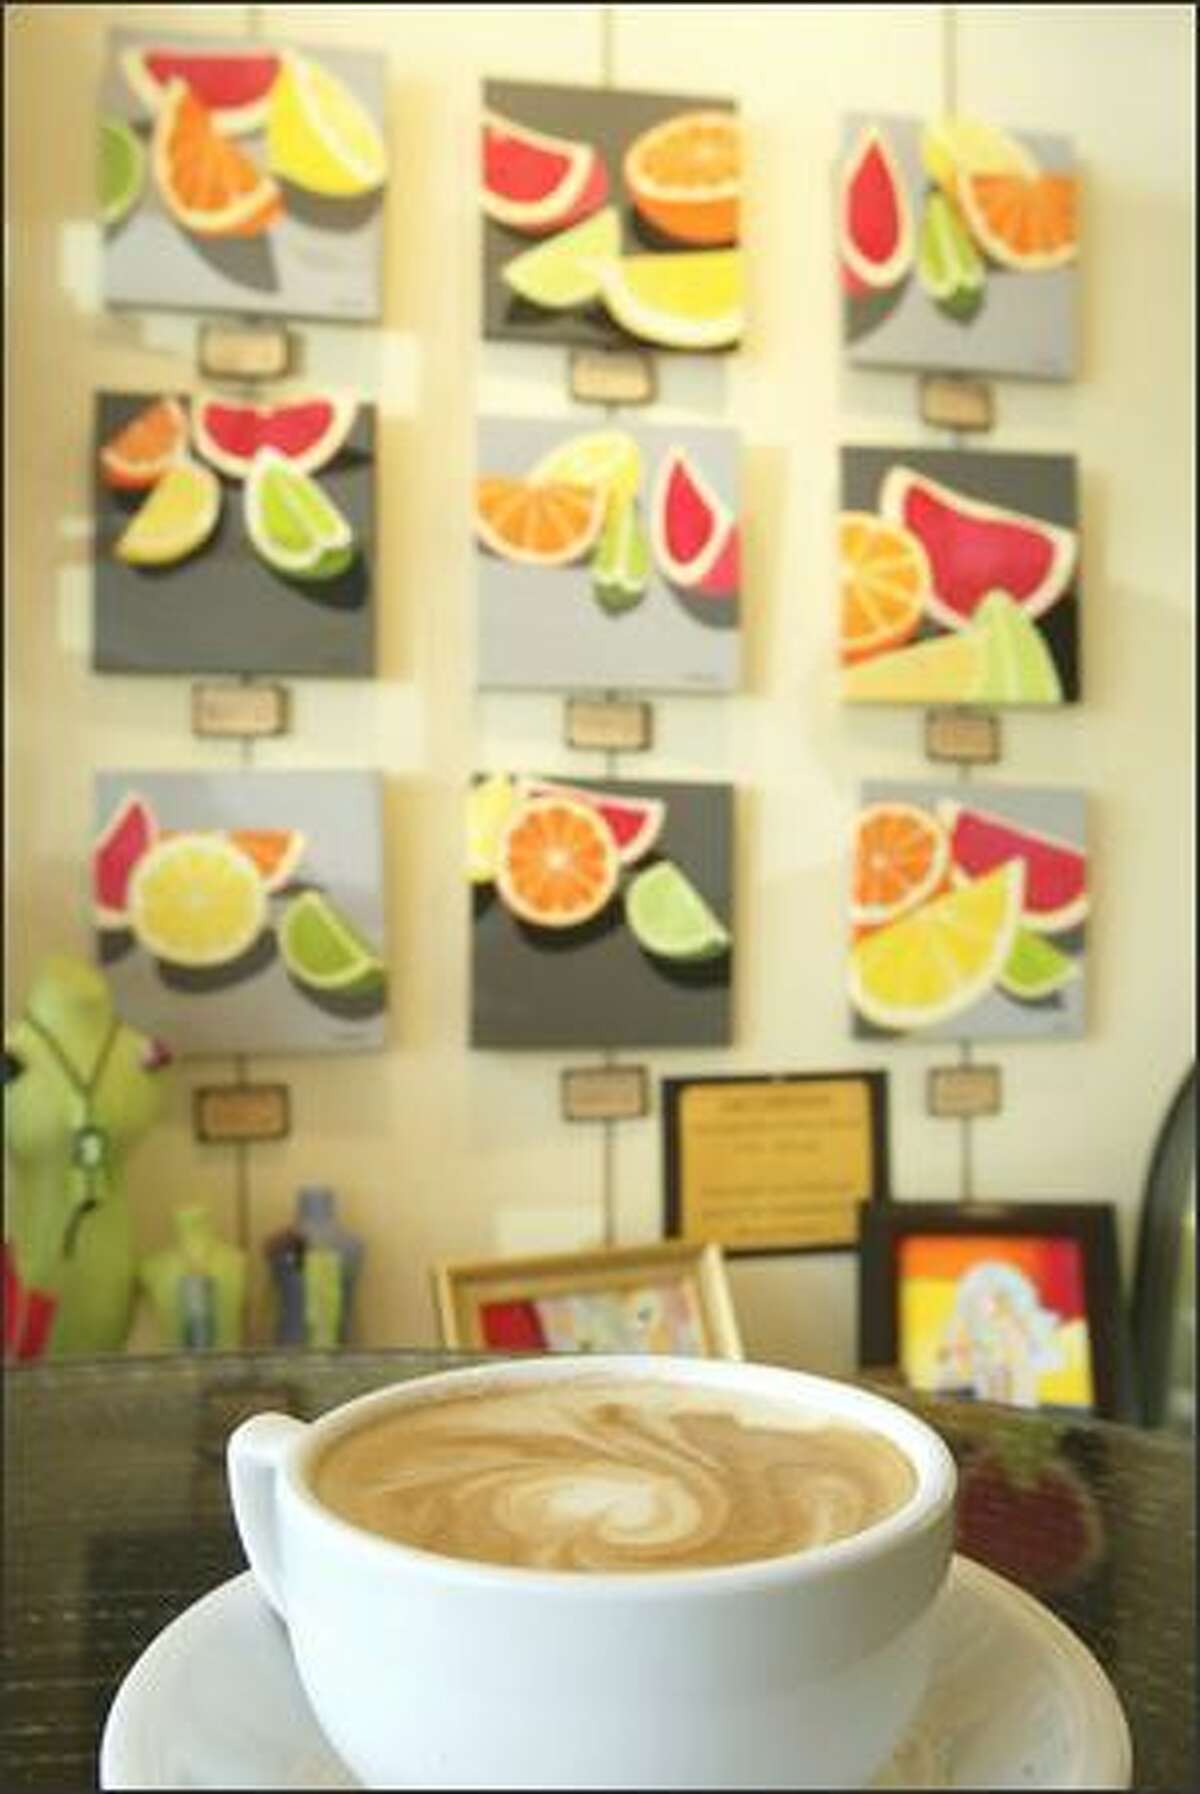 Lynne Alexander's "Citrus Series" is among the fresh art perking up the scene at the Local Color coffeehouse at Pike Place Market.